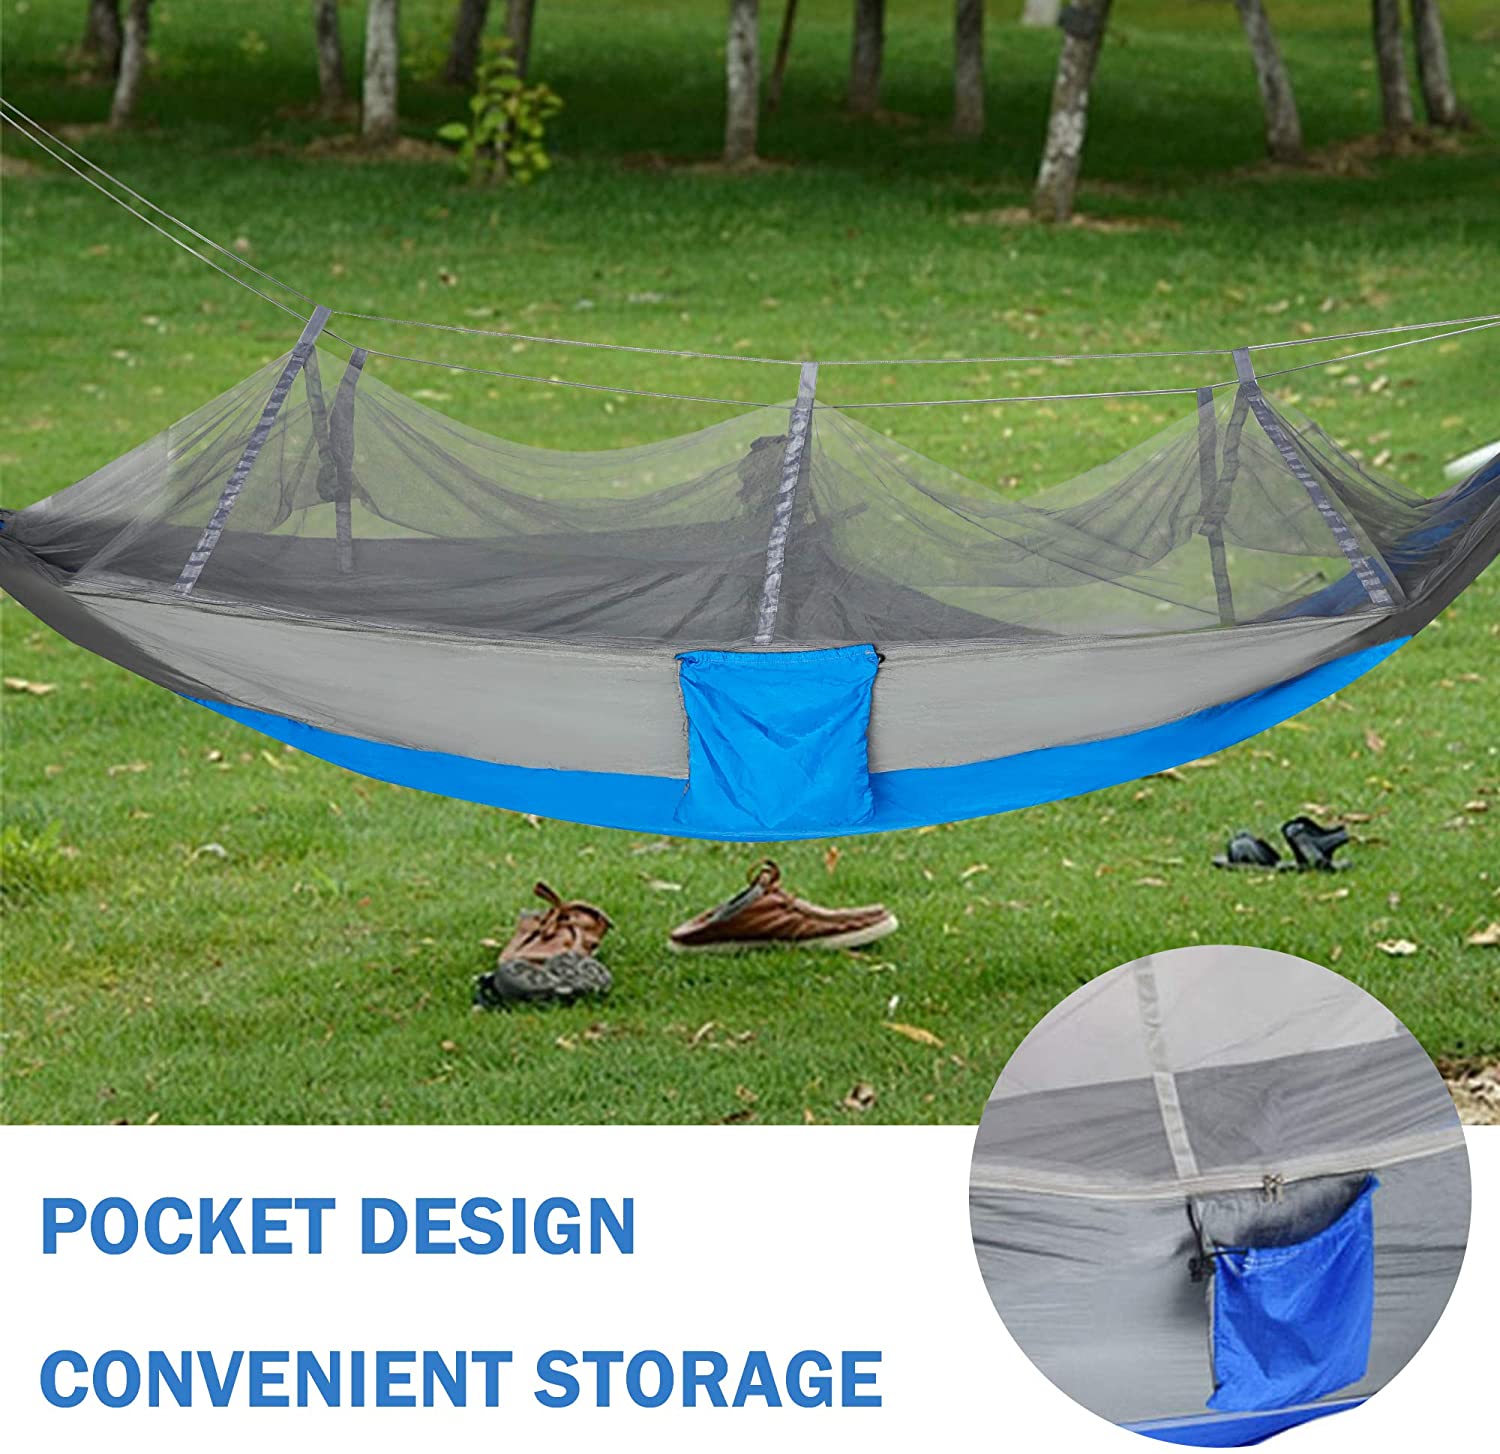 KARMAS PRODUCT Camping Hammock with Mosquito Net, 8.5 ft Single Portable Lightweight Nylon Hammocks with 2 Adjustable Tree Straps for Backpacking, Travel, Beach, Backyard,Hiking (Blue/Gray)